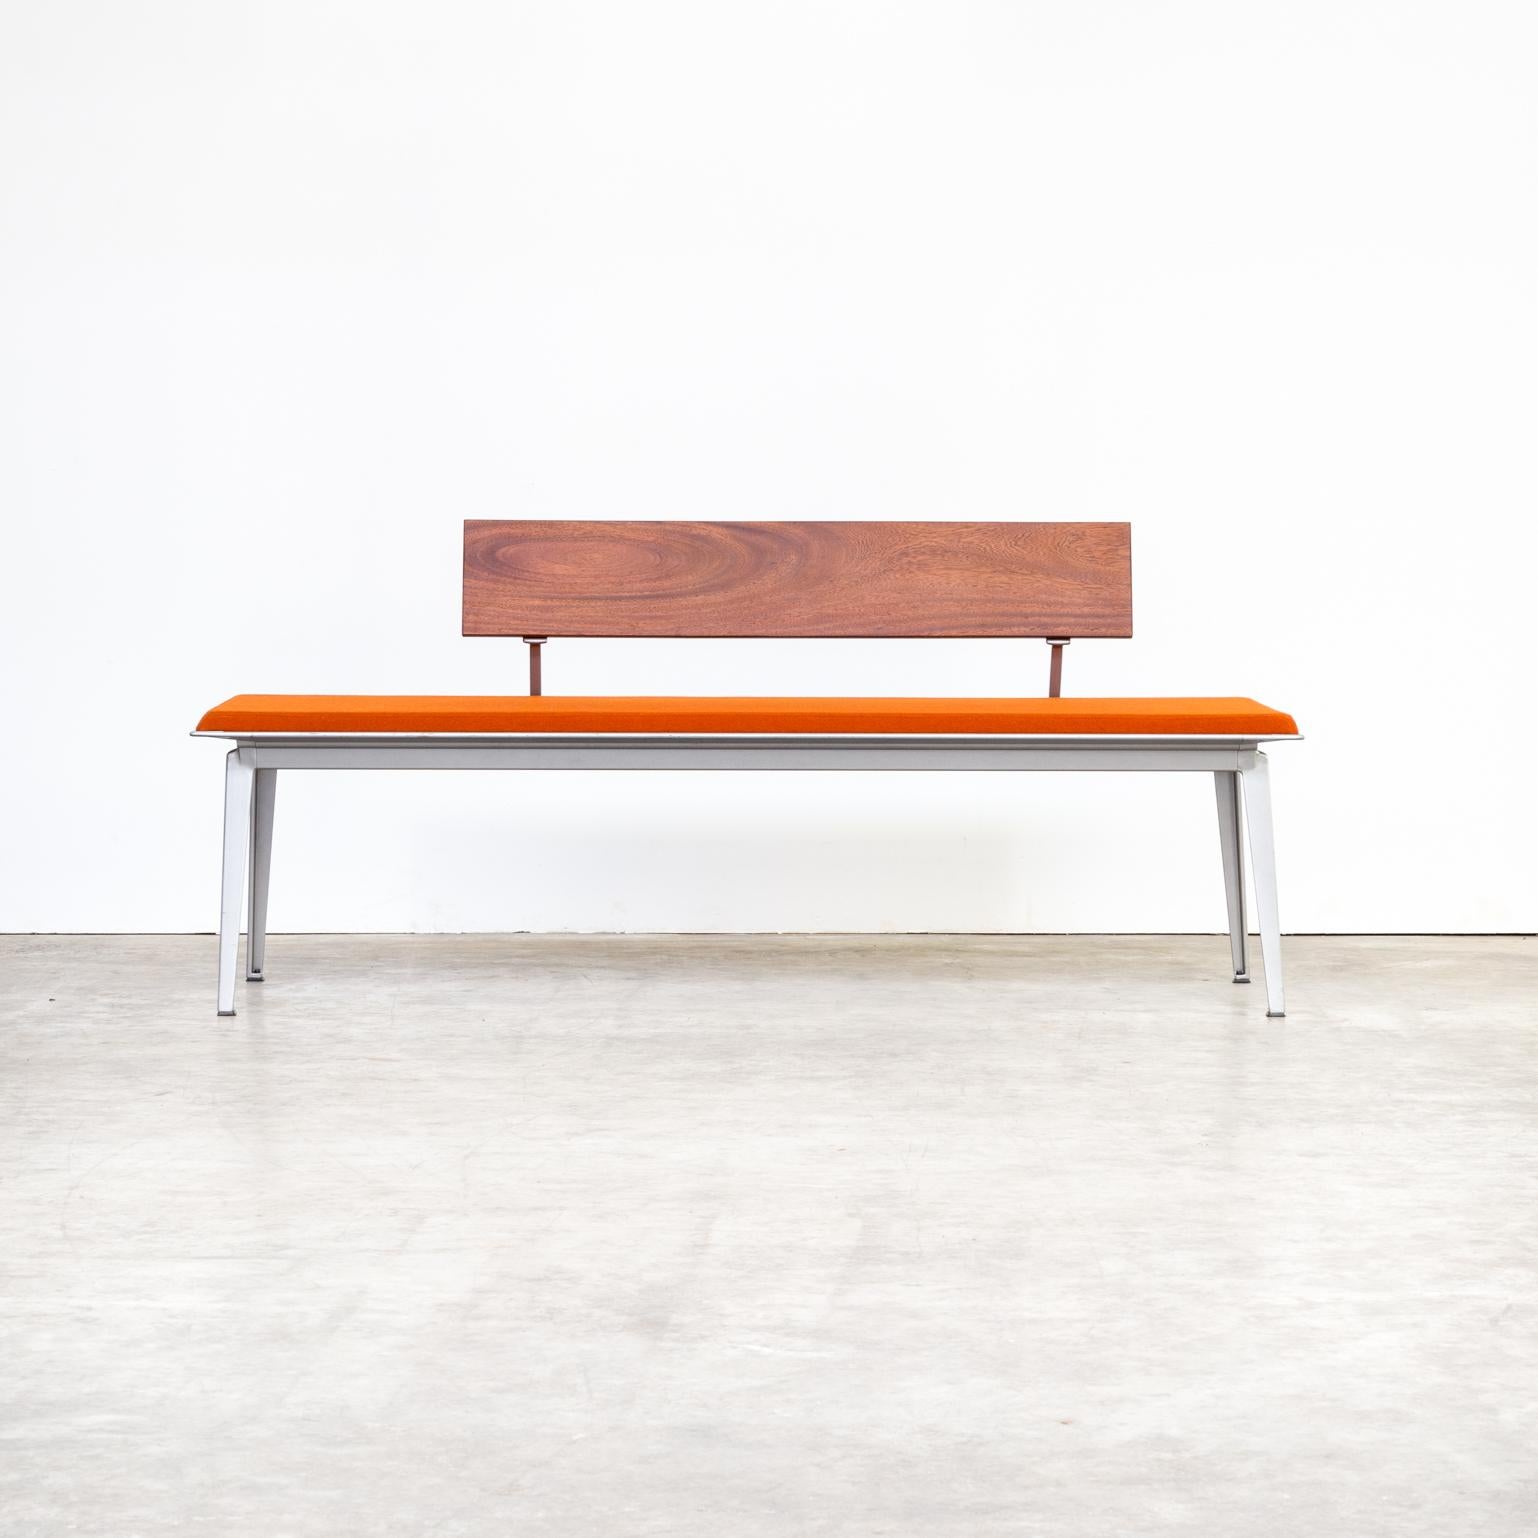 1990s Bas Pruyser ‘Ahrend 600’ Museum Bench for Ahrend de Cirkel In Good Condition For Sale In Amstelveen, Noord